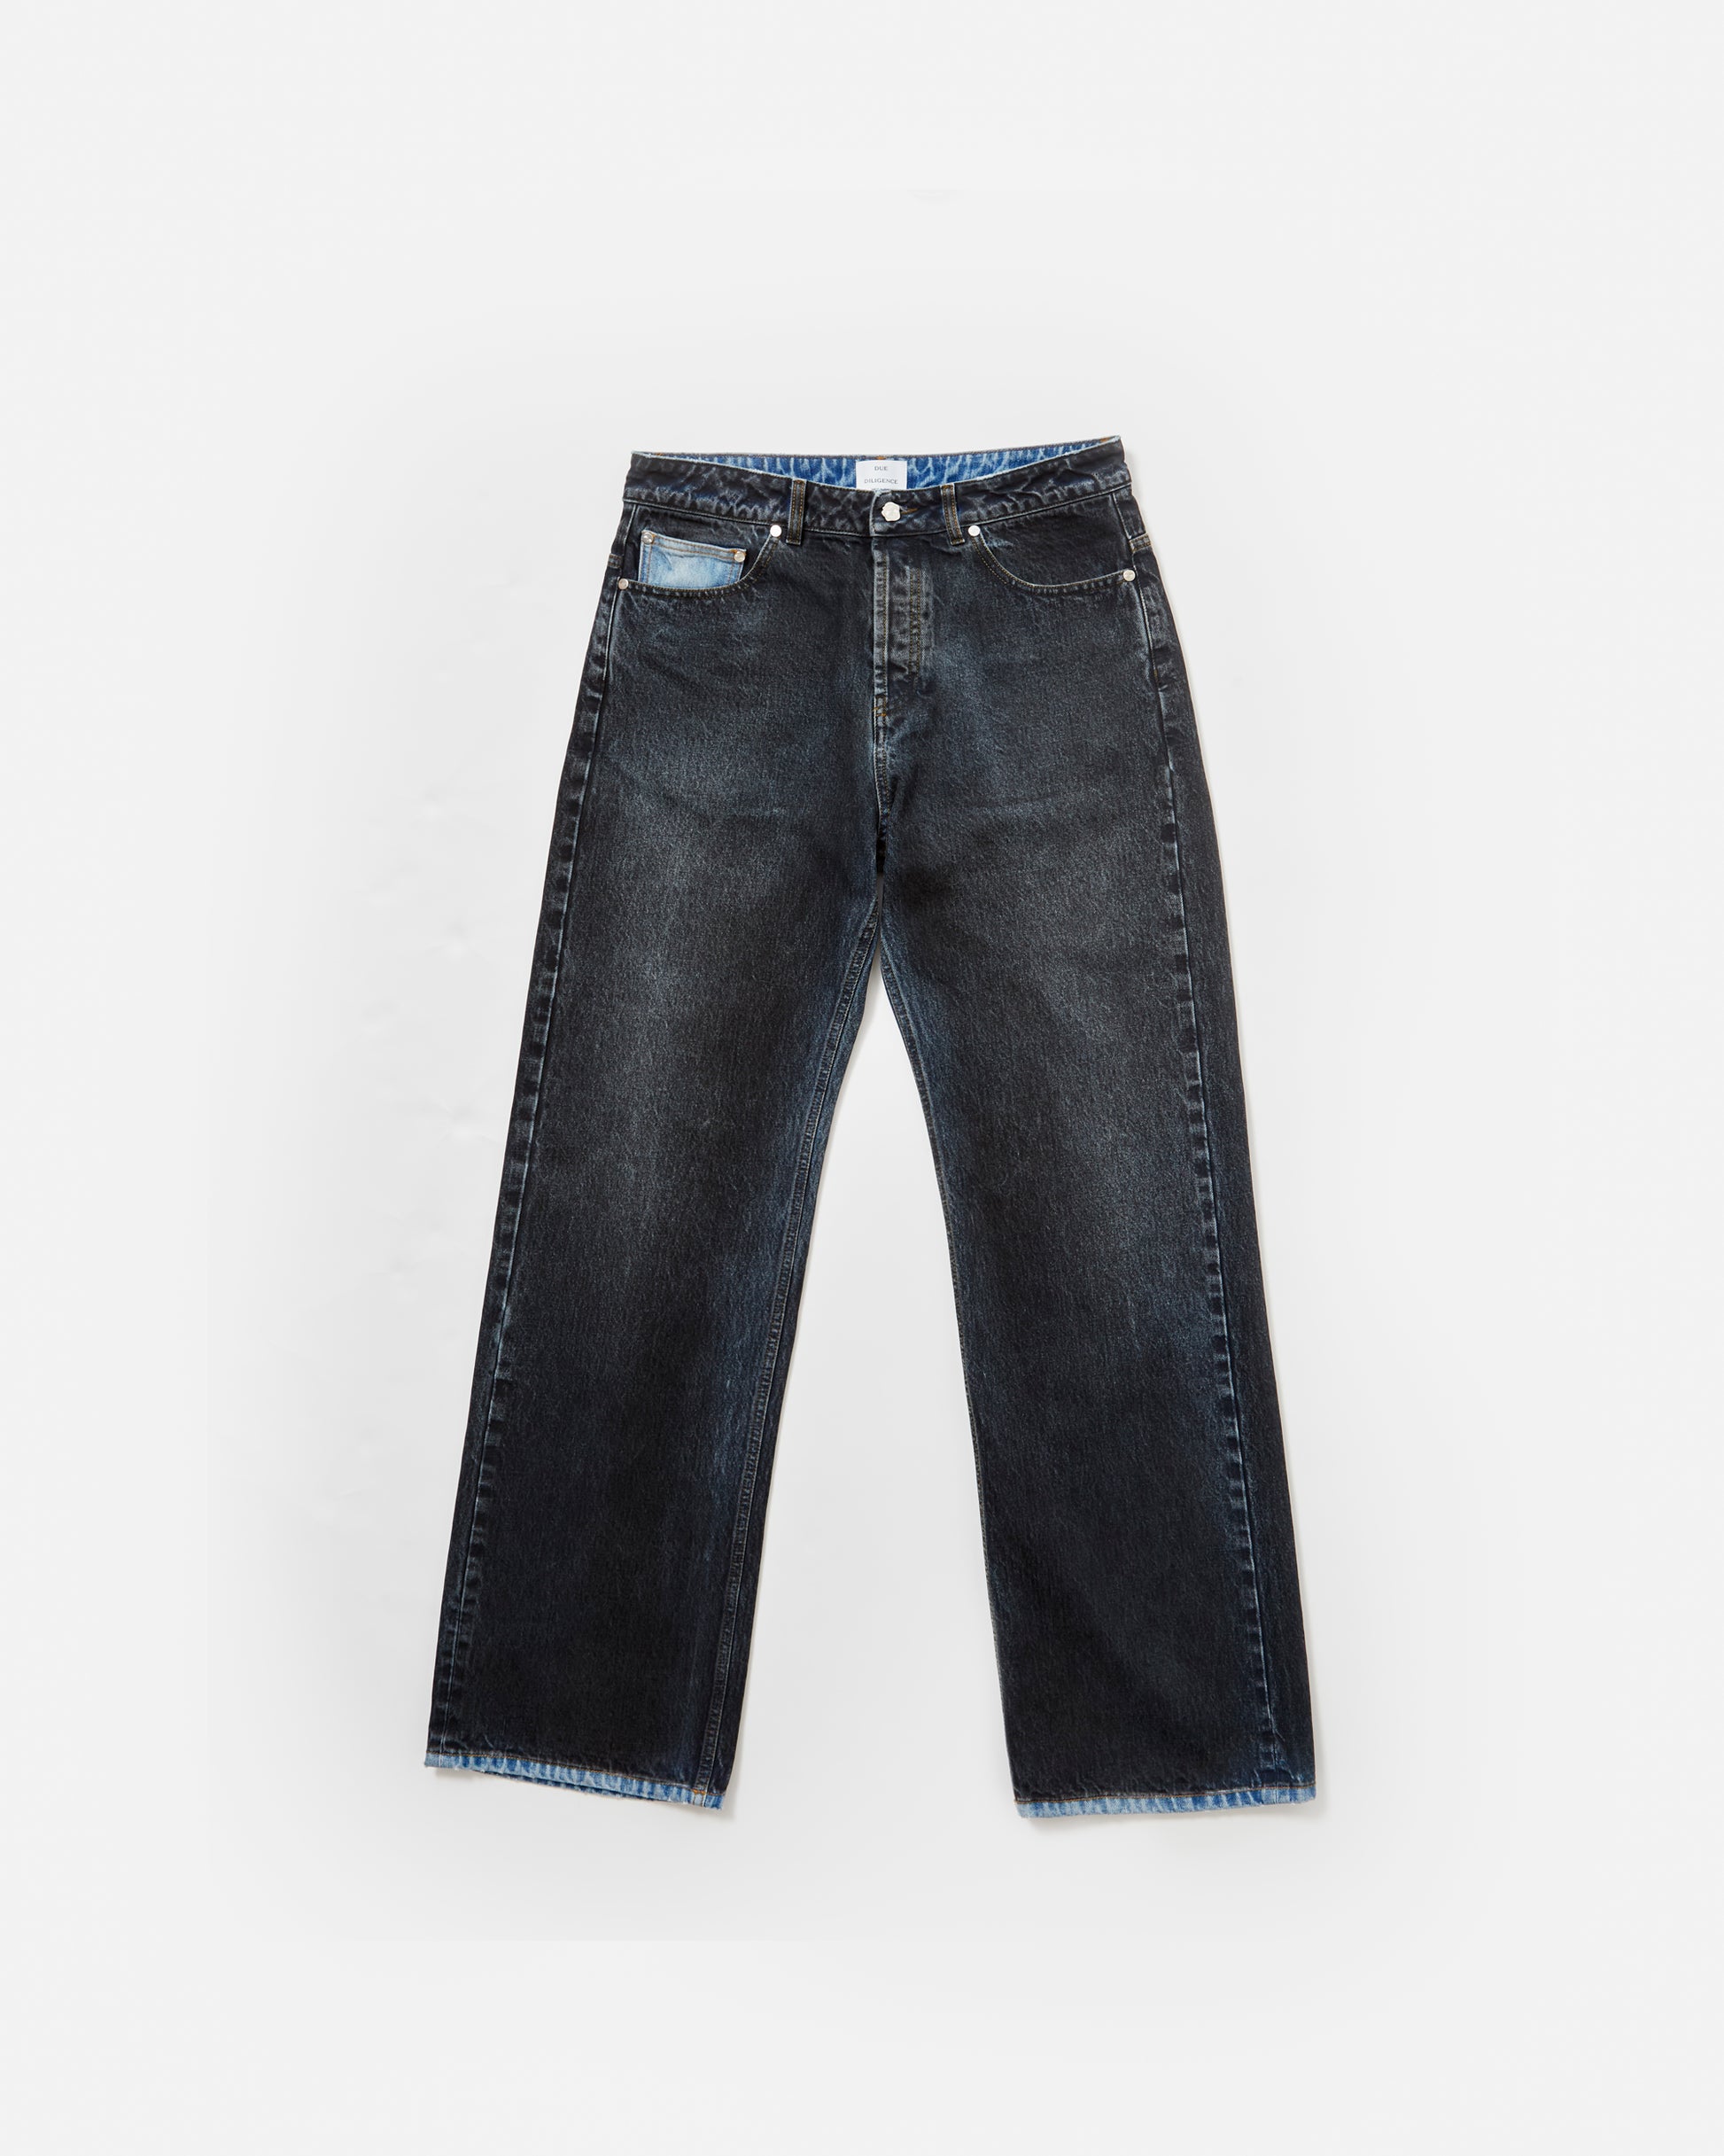 SPRAY DYE JEANS - DISPATCH DATE BEGINNING JANUARY - Due Diligence Apparel